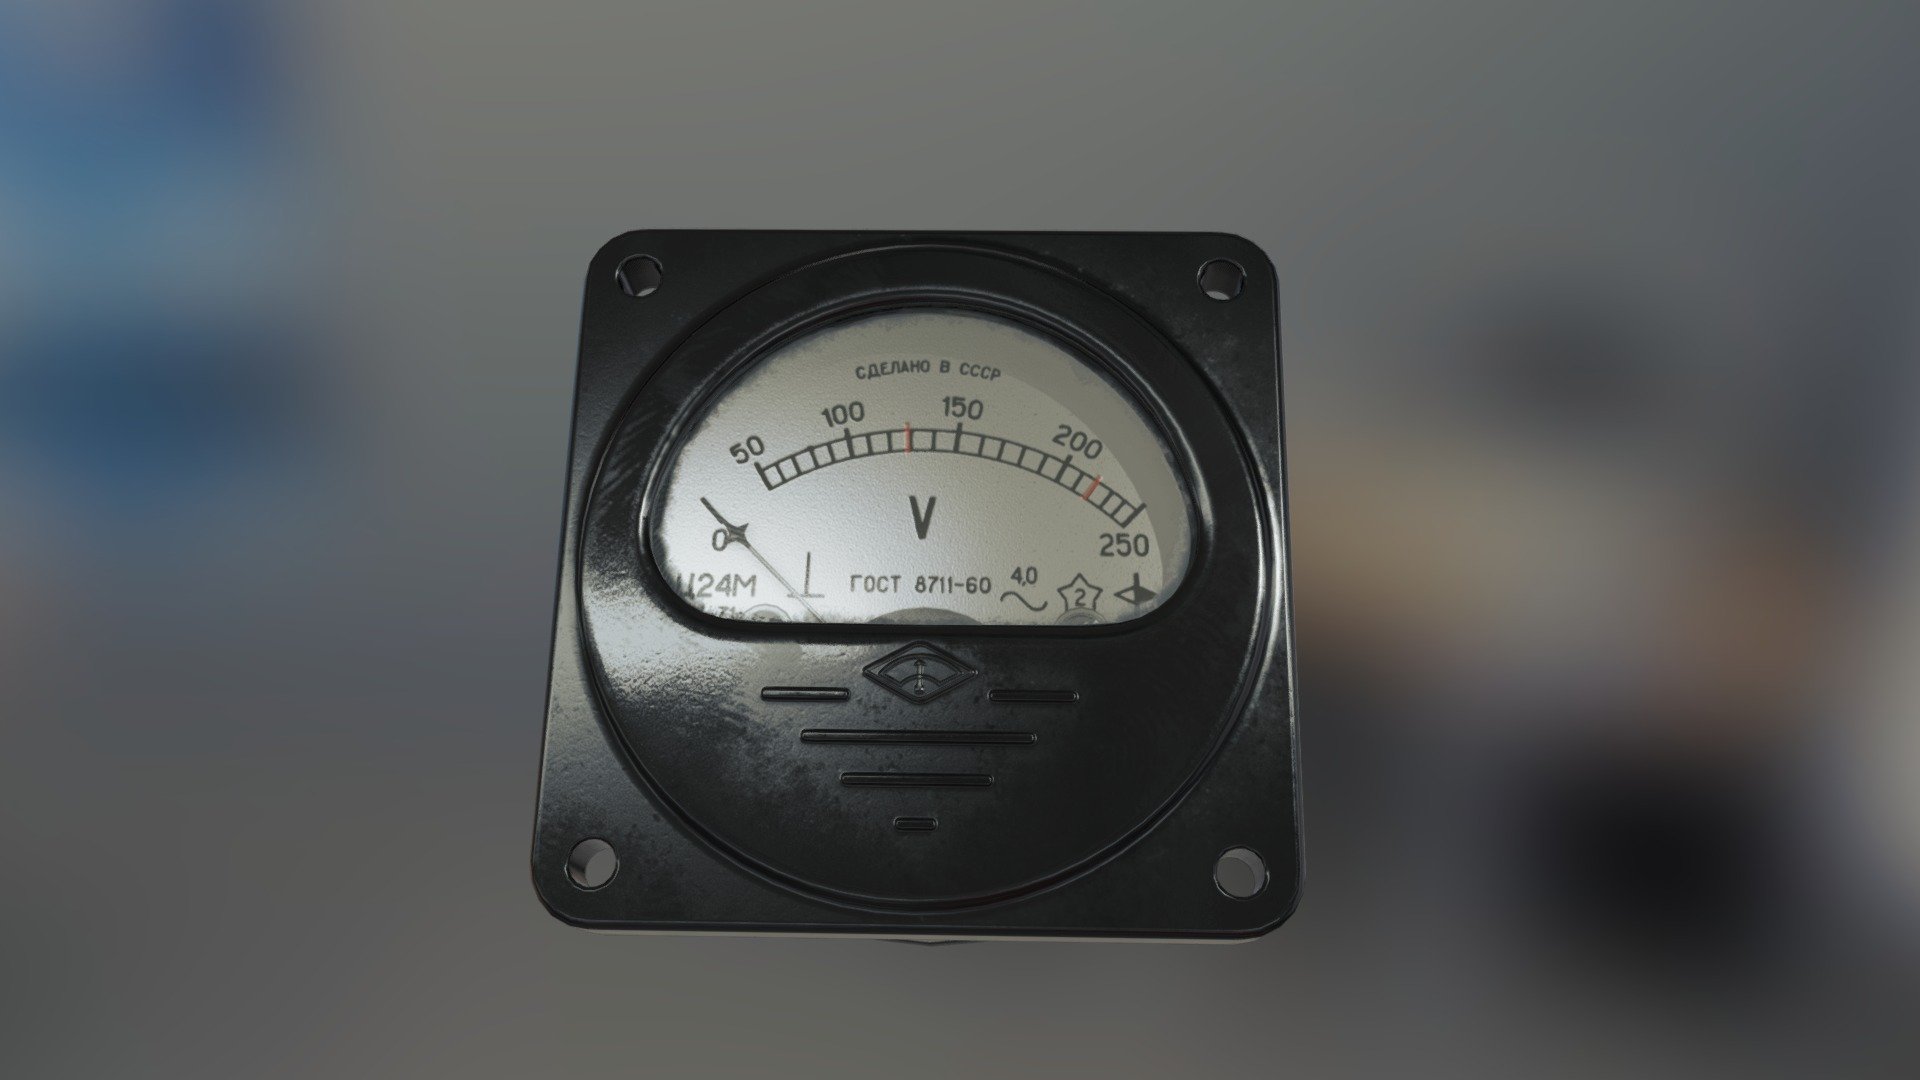 Lowpoly model 4800 tris, 2K PBR Textures, 1 UV, 1:1 scale.
Blend file with highpoly and lowpoly included. Also I share hand made indicator mask for texturing.
What is in the blend file: https://youtu.be/h-5Dcw-59WU - USSR C24M Voltmeter - 3D model by Yuri Kruglov (@YuriKruglov) 3d model